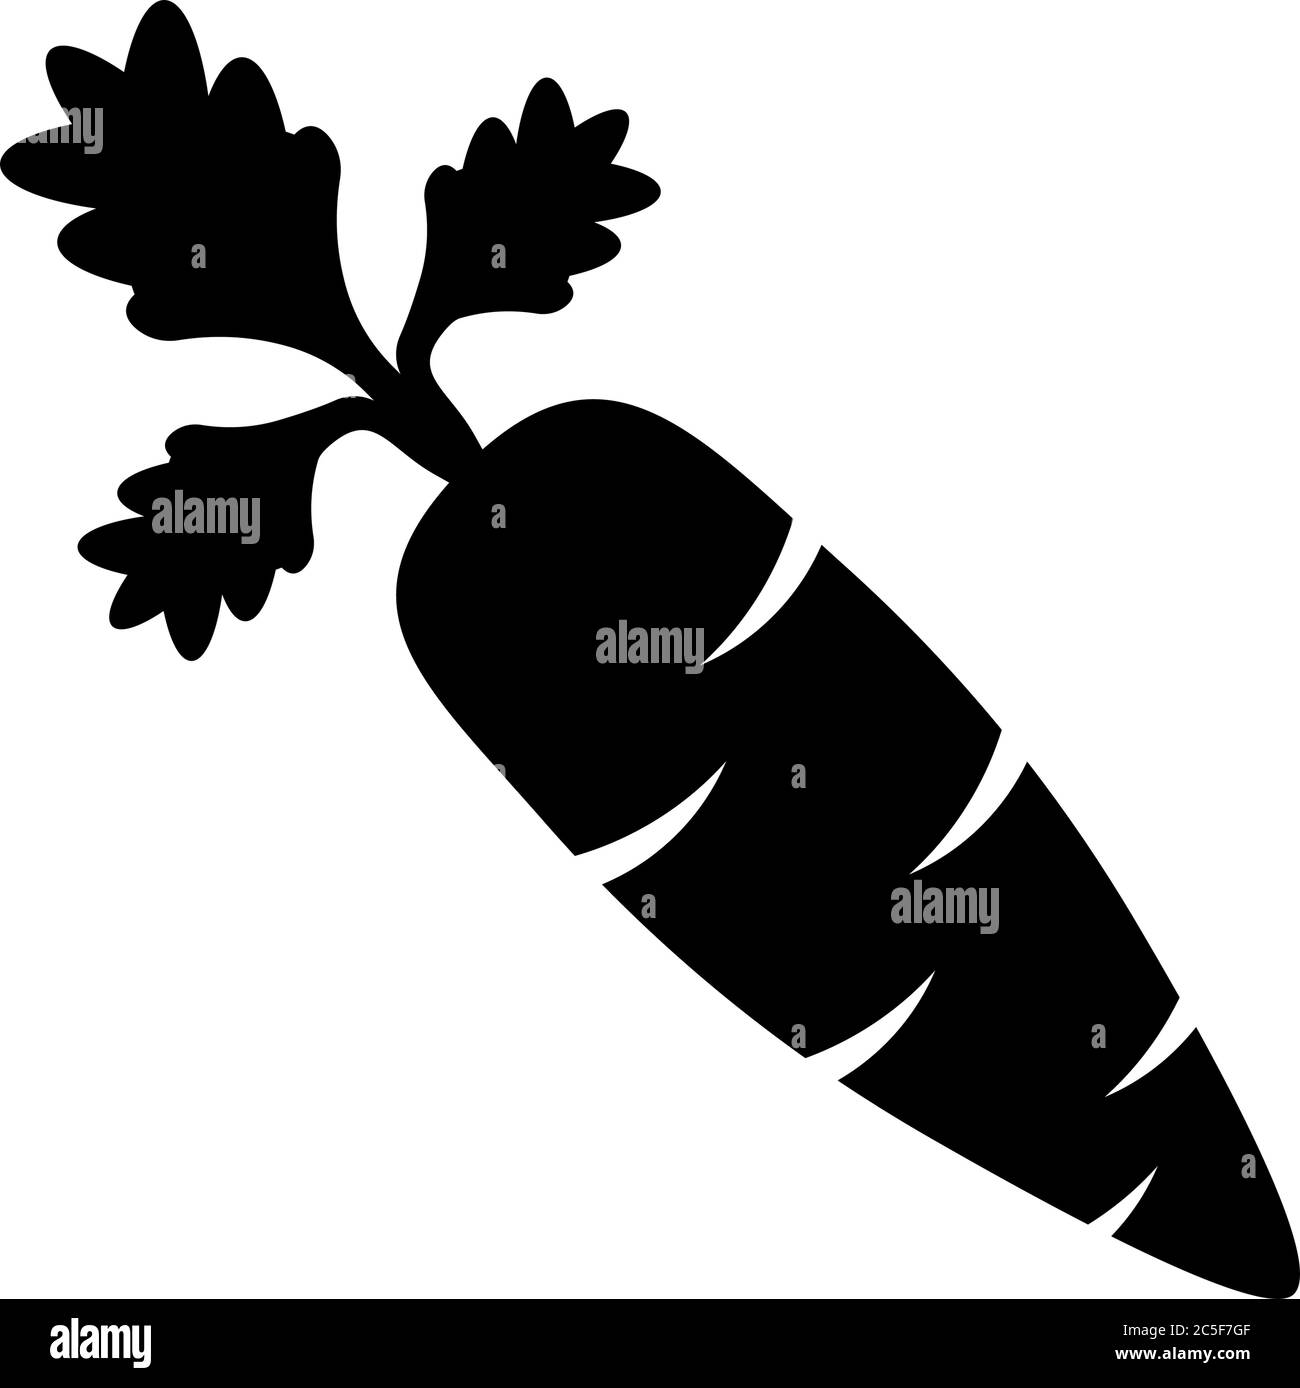 Black carrot icon vector healthy vegetable illustration isolated on white background Stock Vector